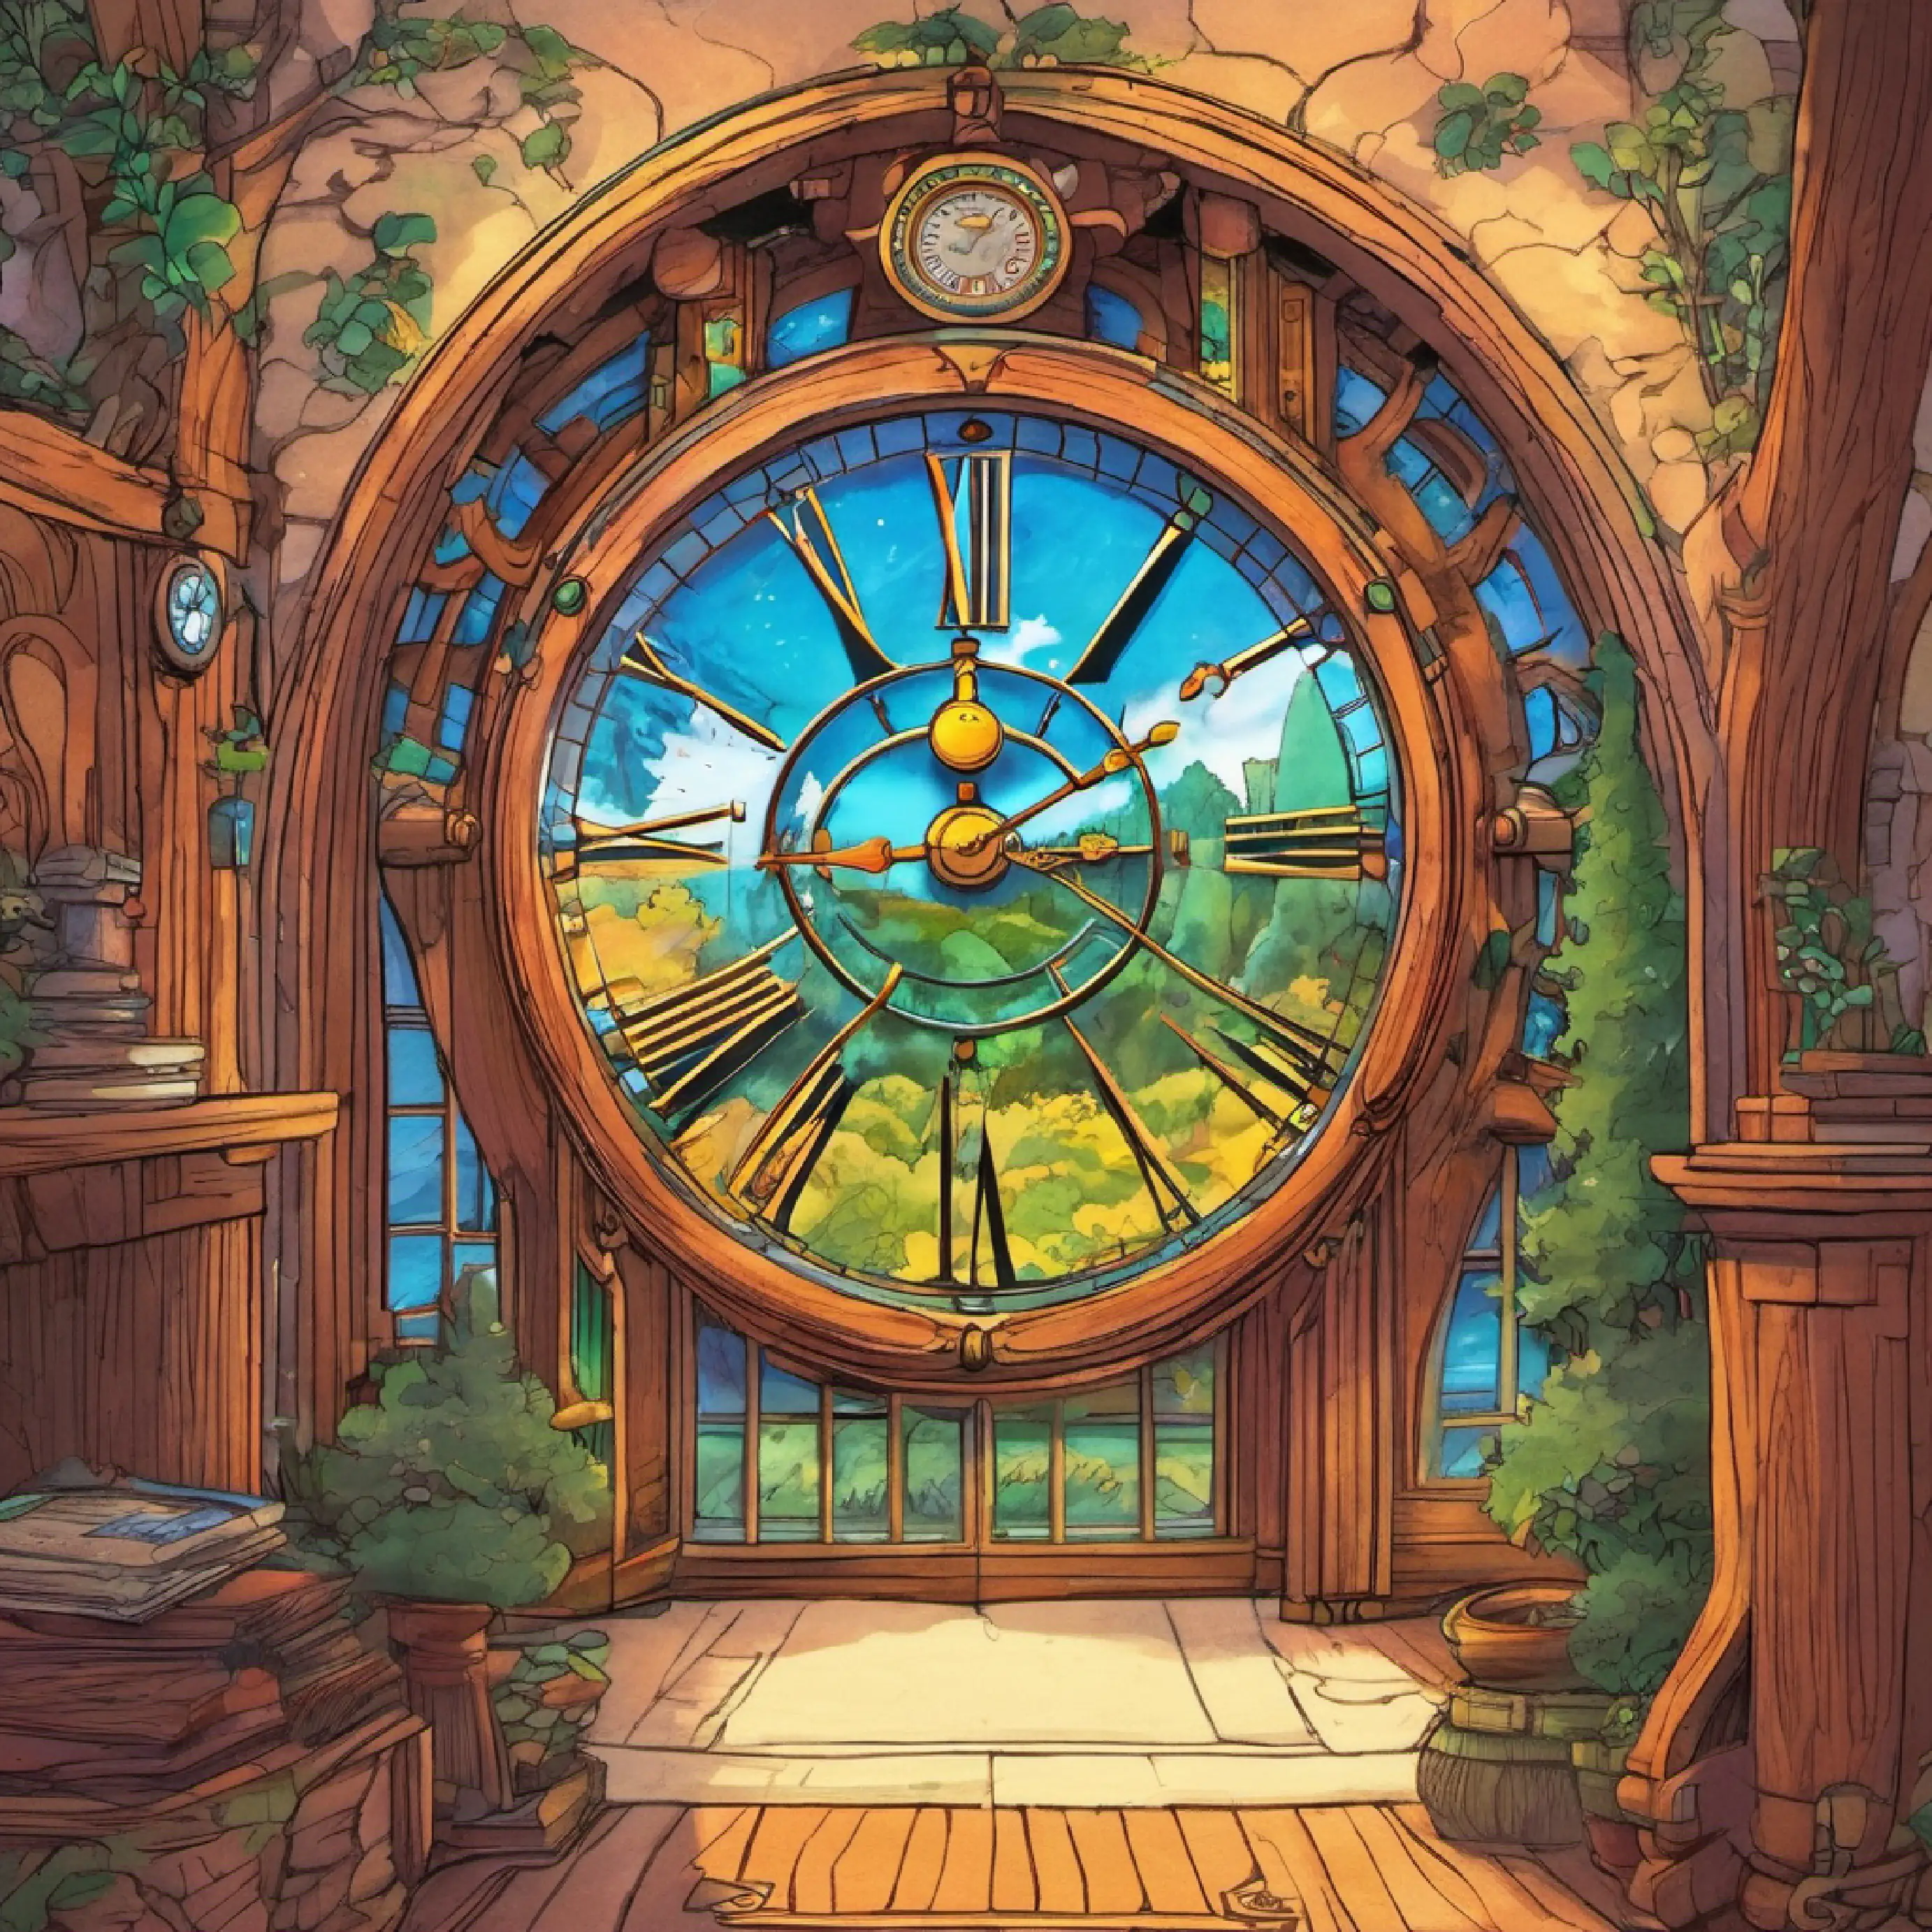 Inside Ravenwood's, discovery of a living clock, the clock as a portal